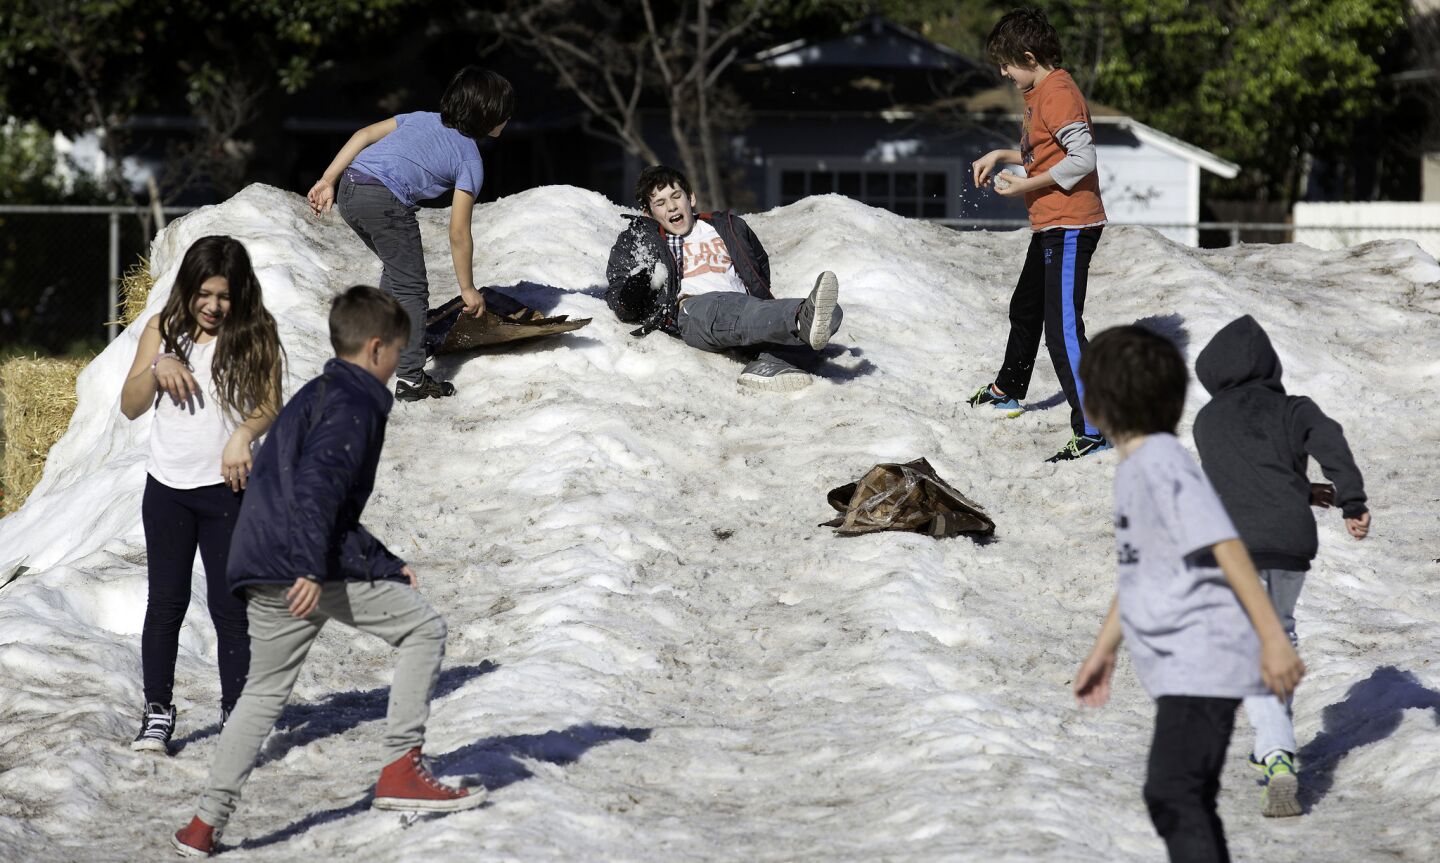 Elementary schoolchildren play on a snow hill at the Studio City Recreation Center in Studio City after all Los Angeles Unified School District campuses and several private schools were closed after a security threat.